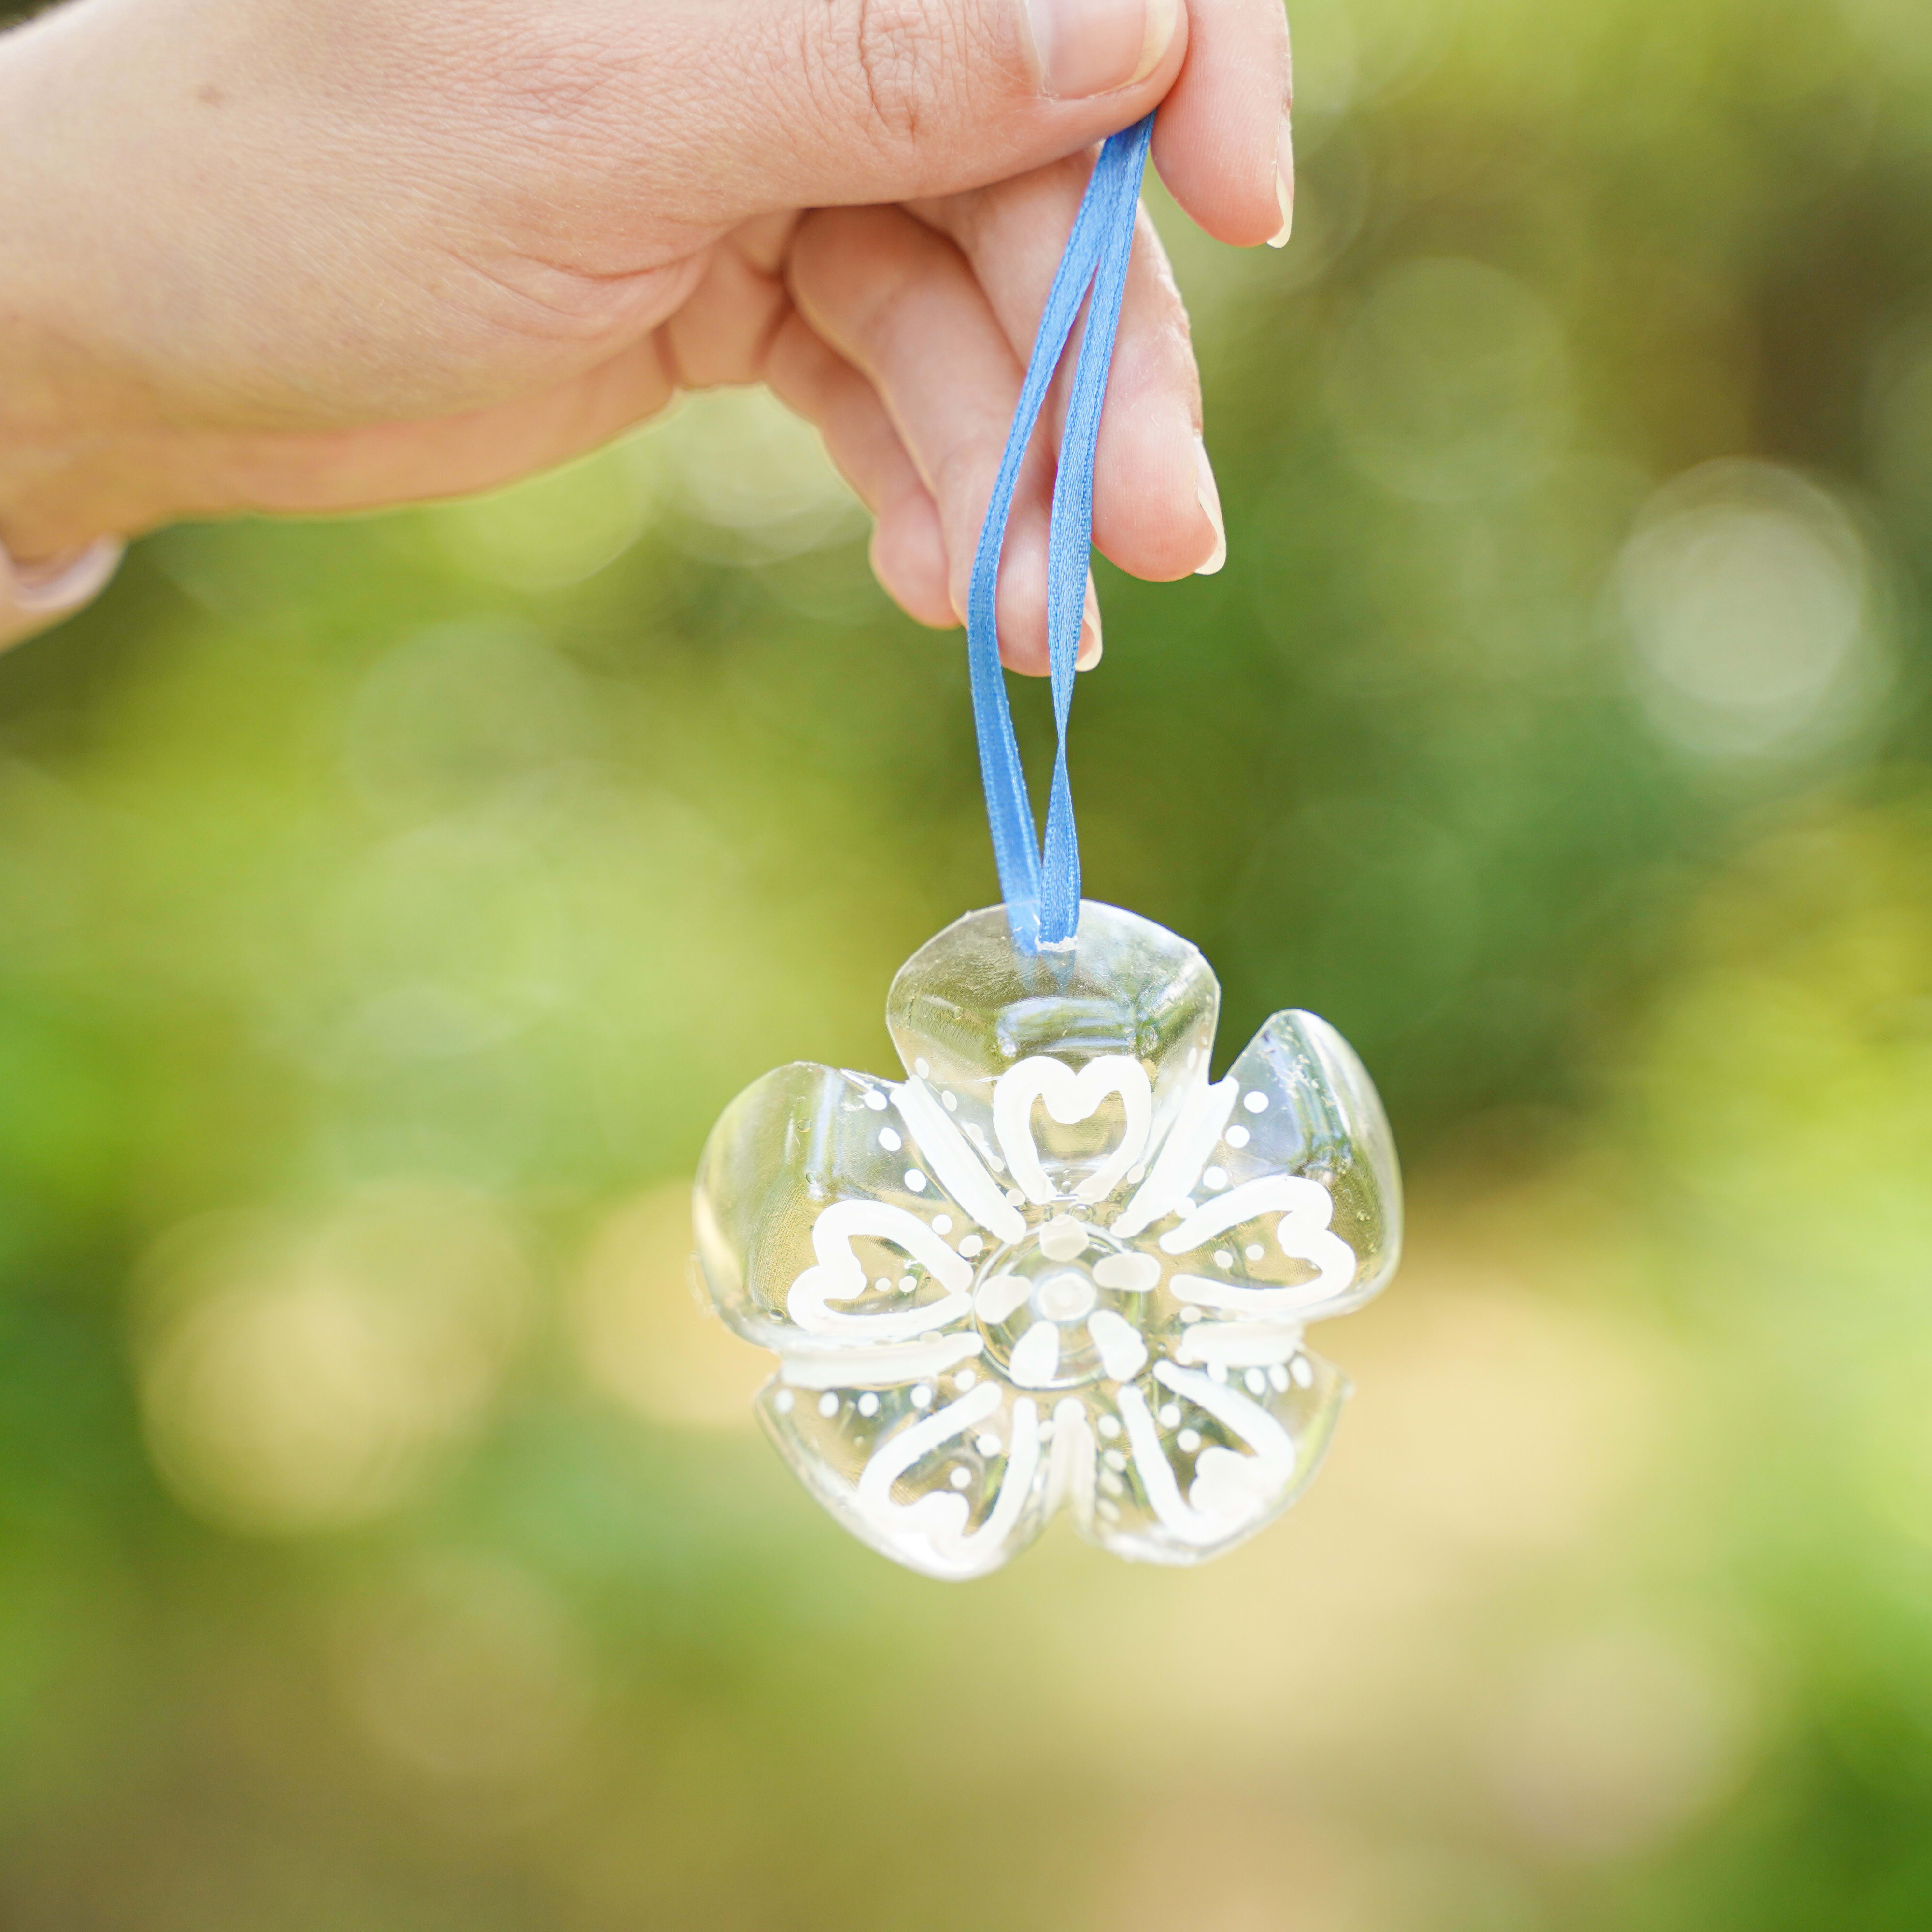 How to DIY Snowflake Ornaments from Plastic Bottles